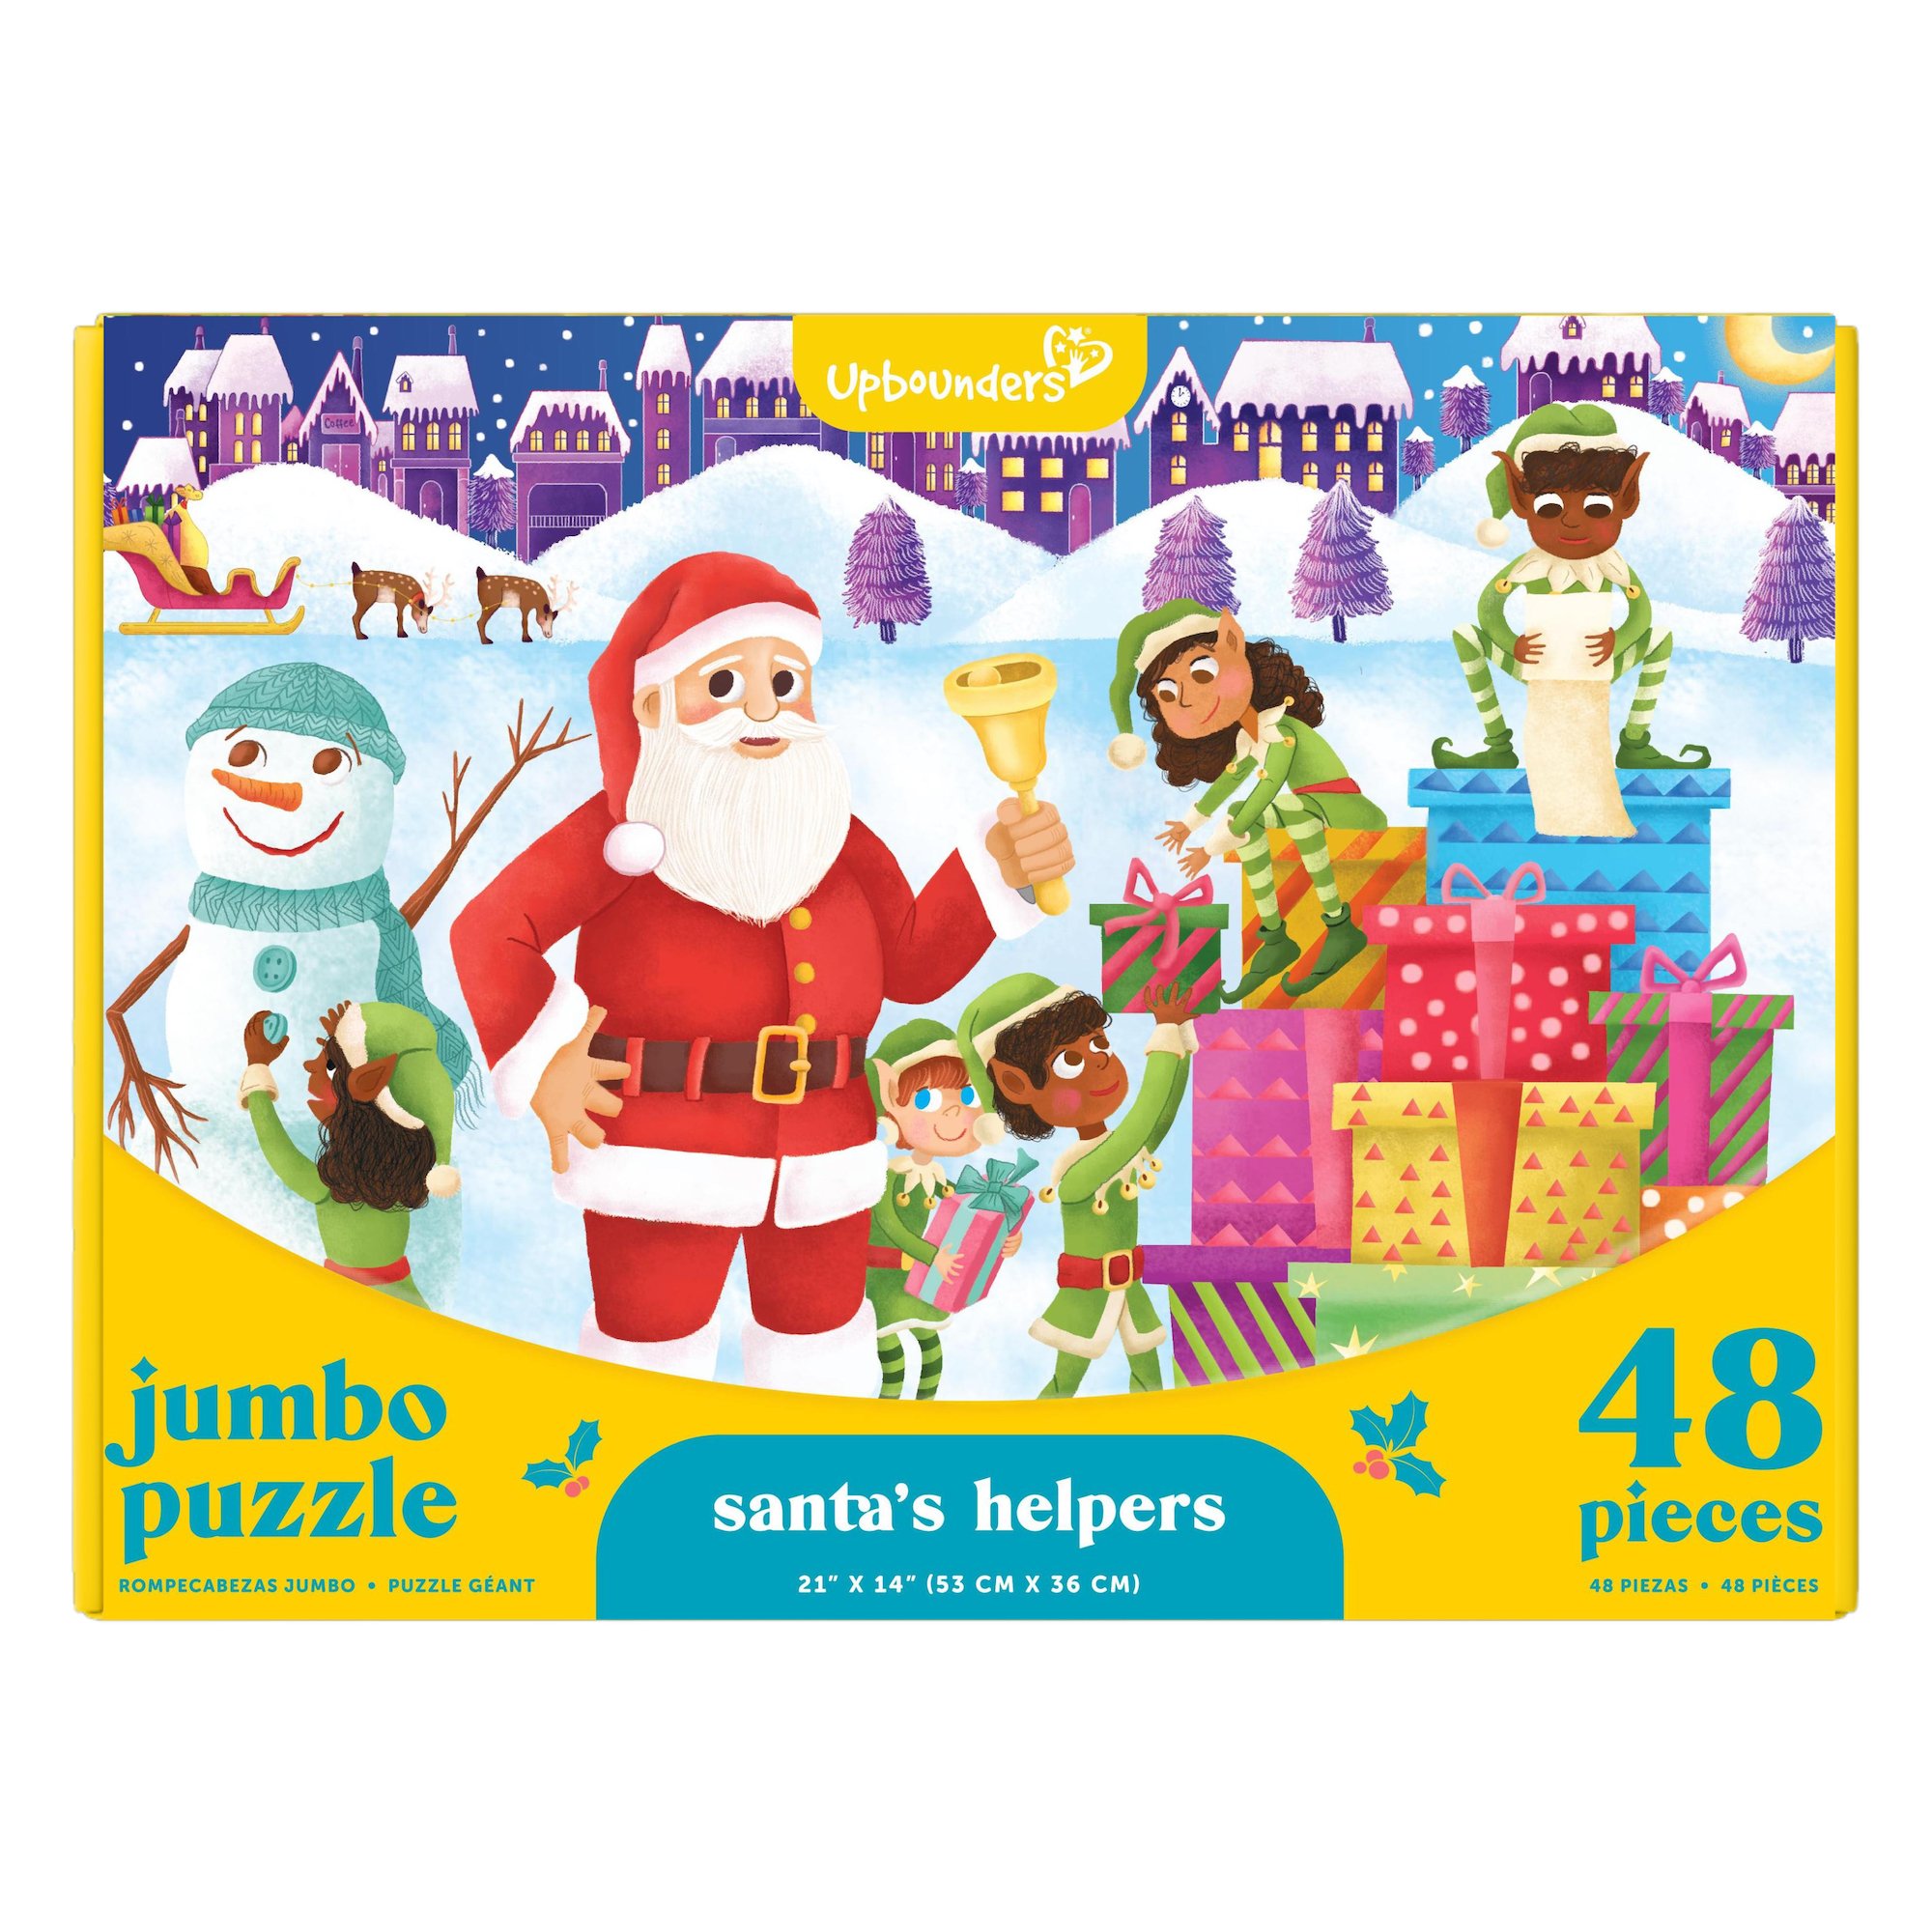 Upbounders® Santa's Helper's 48 PC Puzzle - A Multicultural Christmas Puzzle for Kids / $18.99